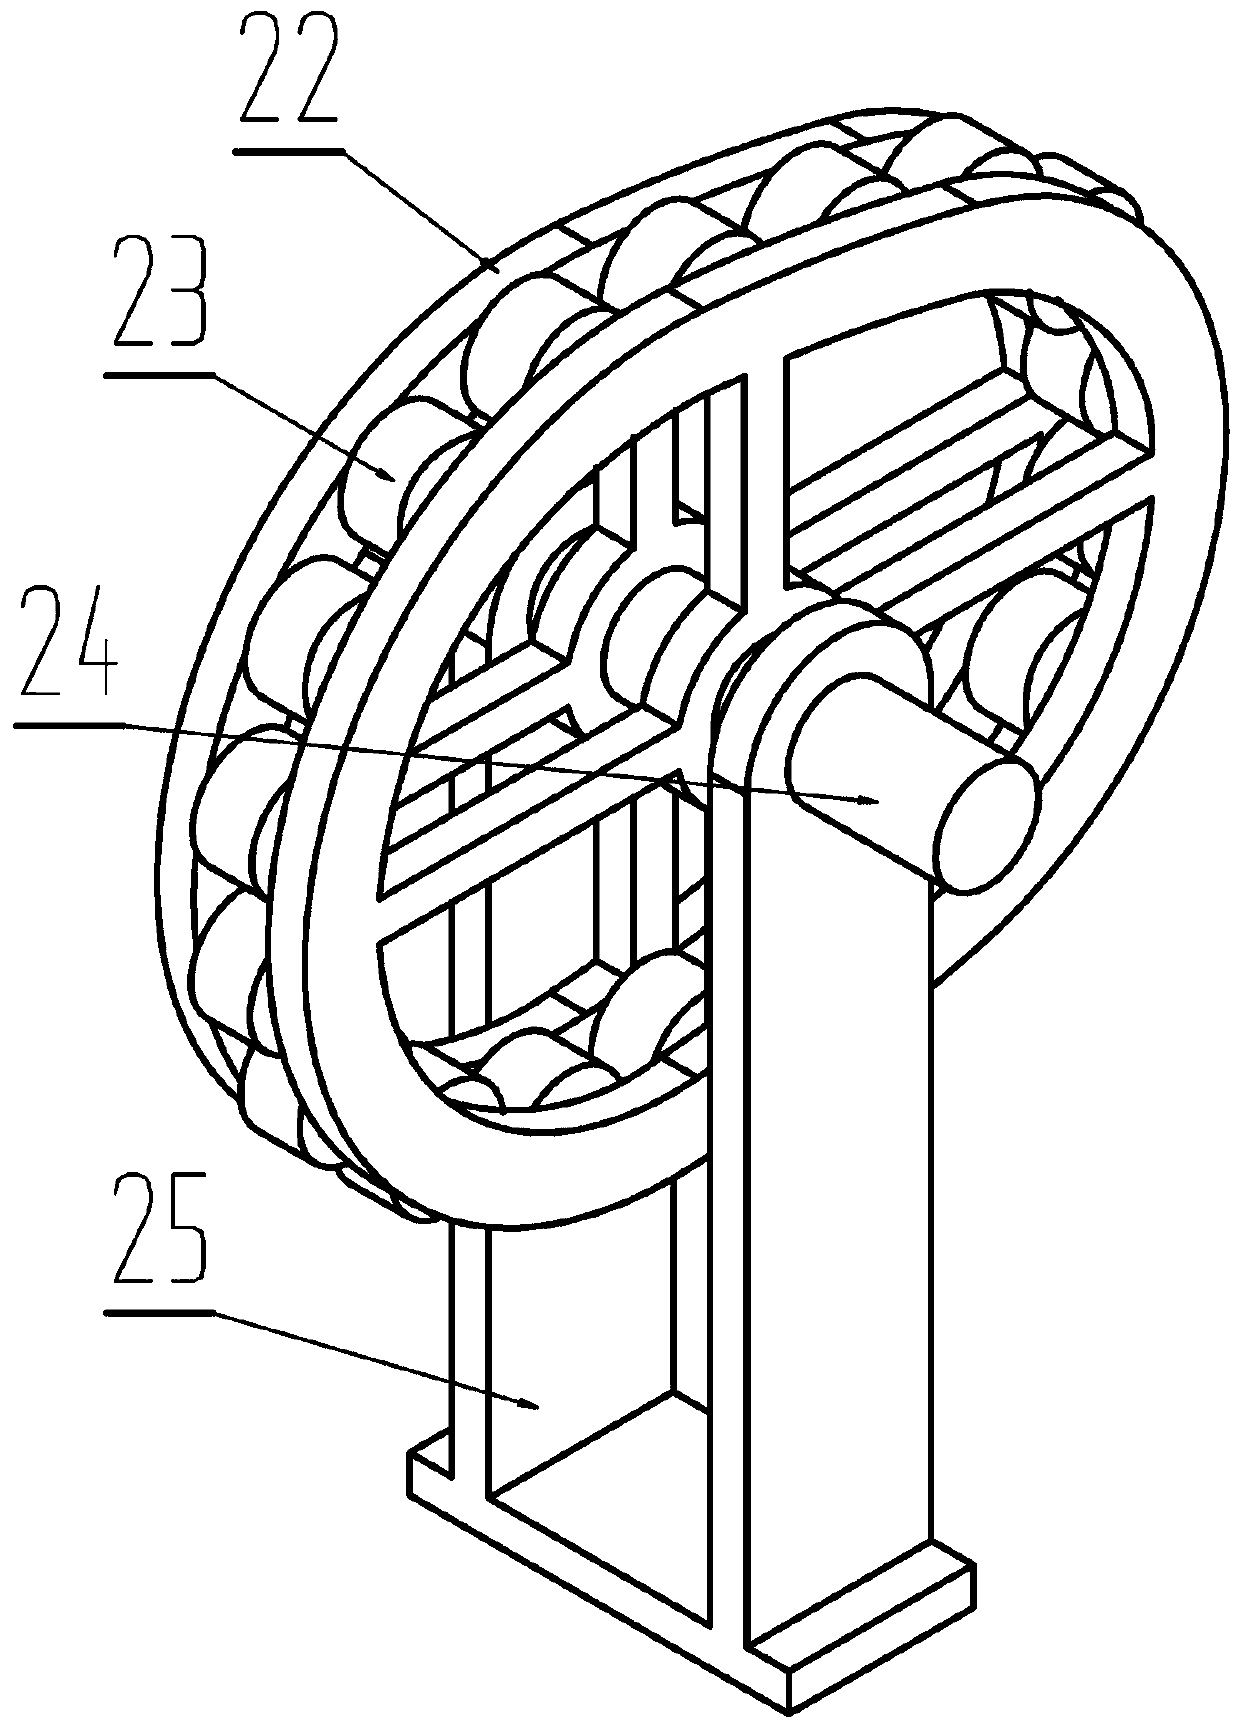 Device for collecting and recovering surgical tools